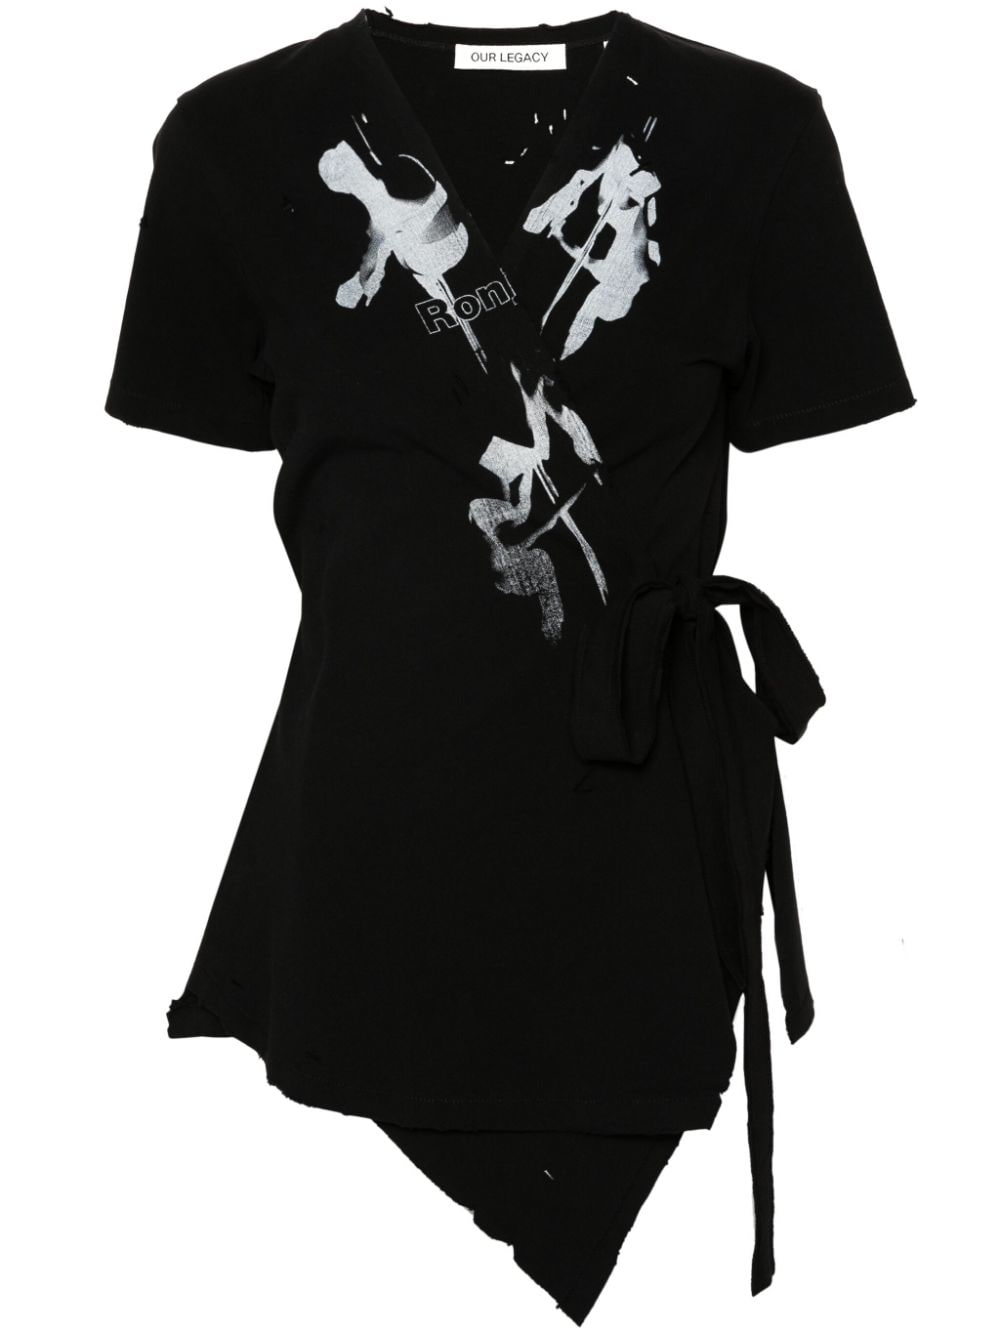 OUR LEGACY Ronja-print distressed wrap T-shirt - Black von OUR LEGACY